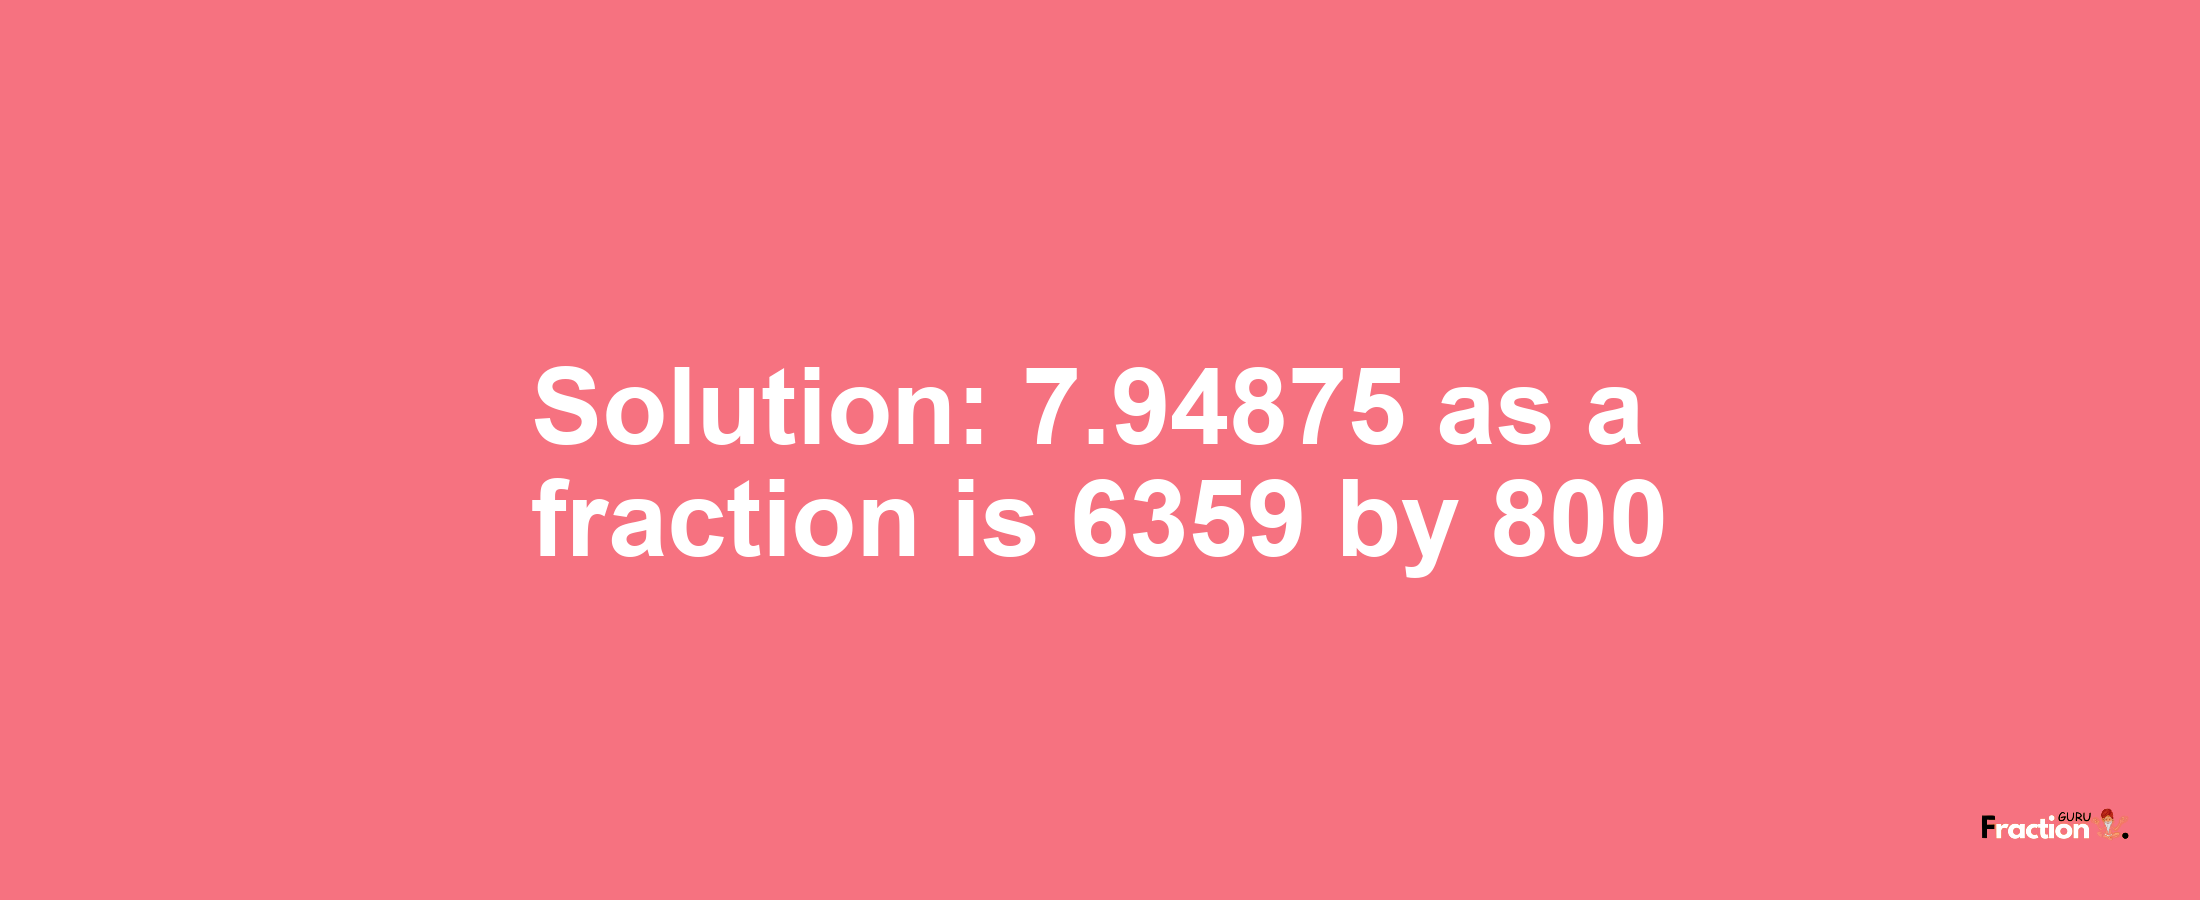 Solution:7.94875 as a fraction is 6359/800